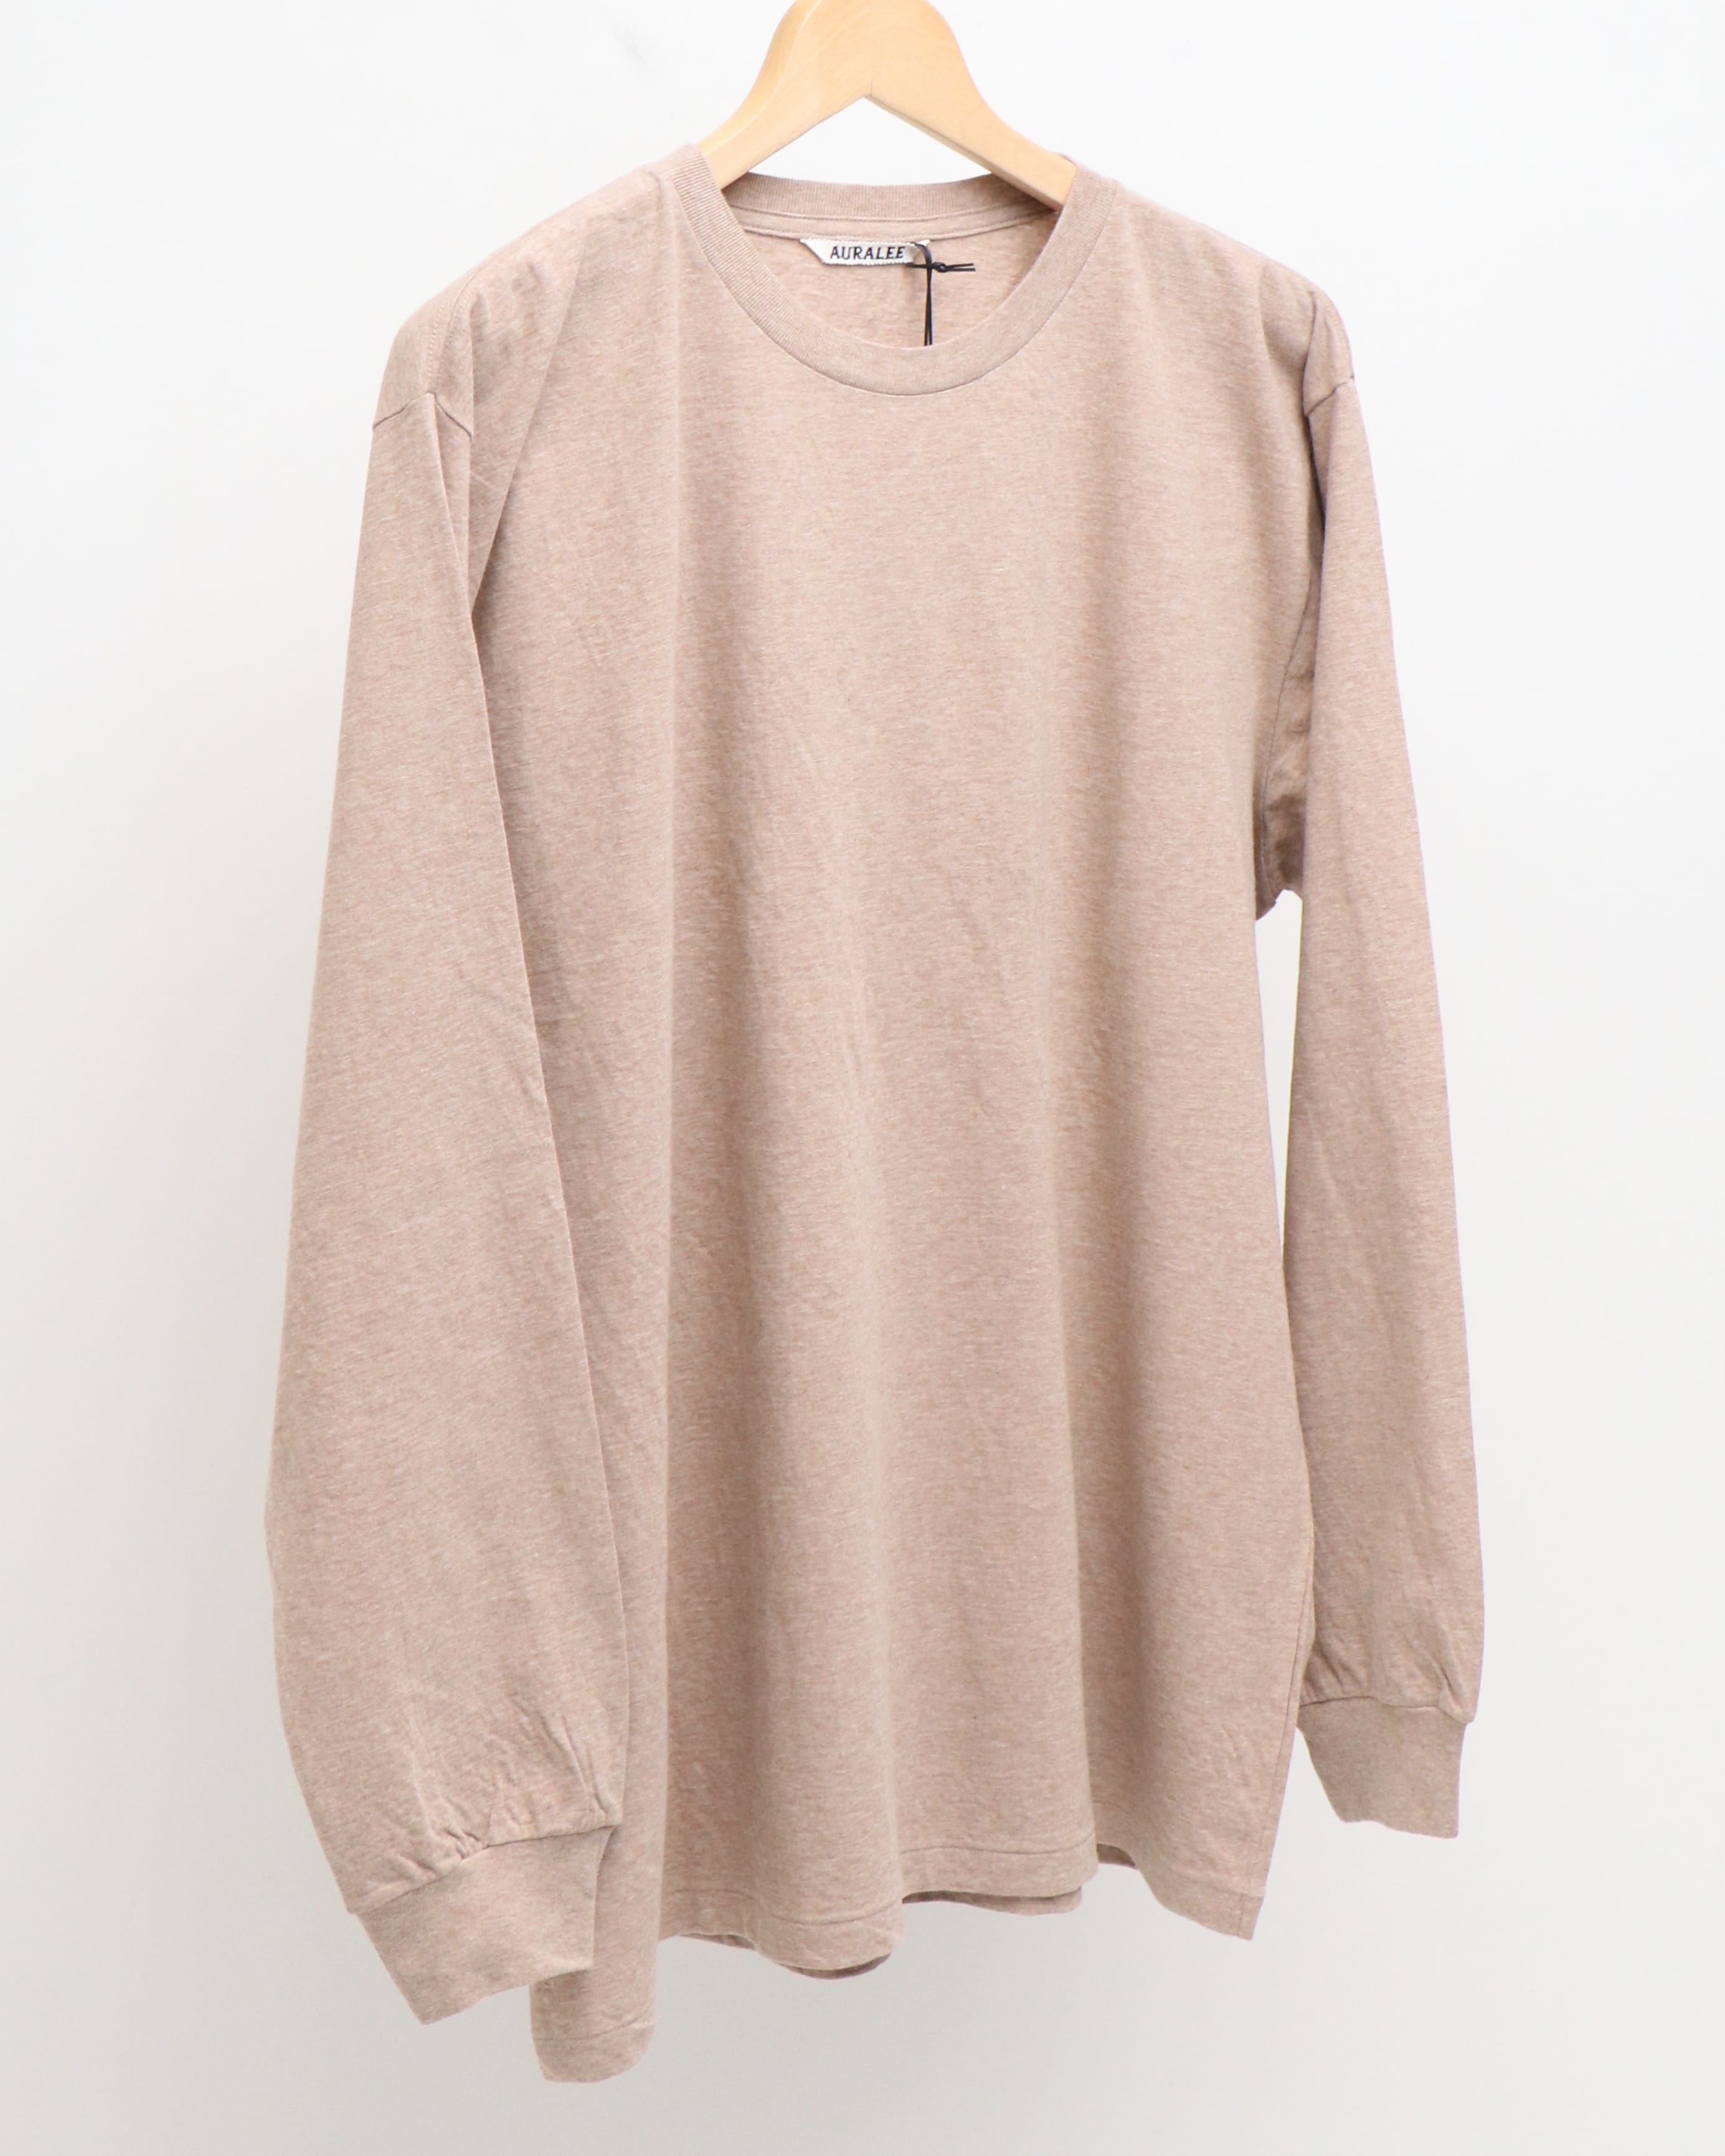 HARD TWIST COTTON CASHMERE L/S TEE TOP BEIGE – TIME AFTER TIME